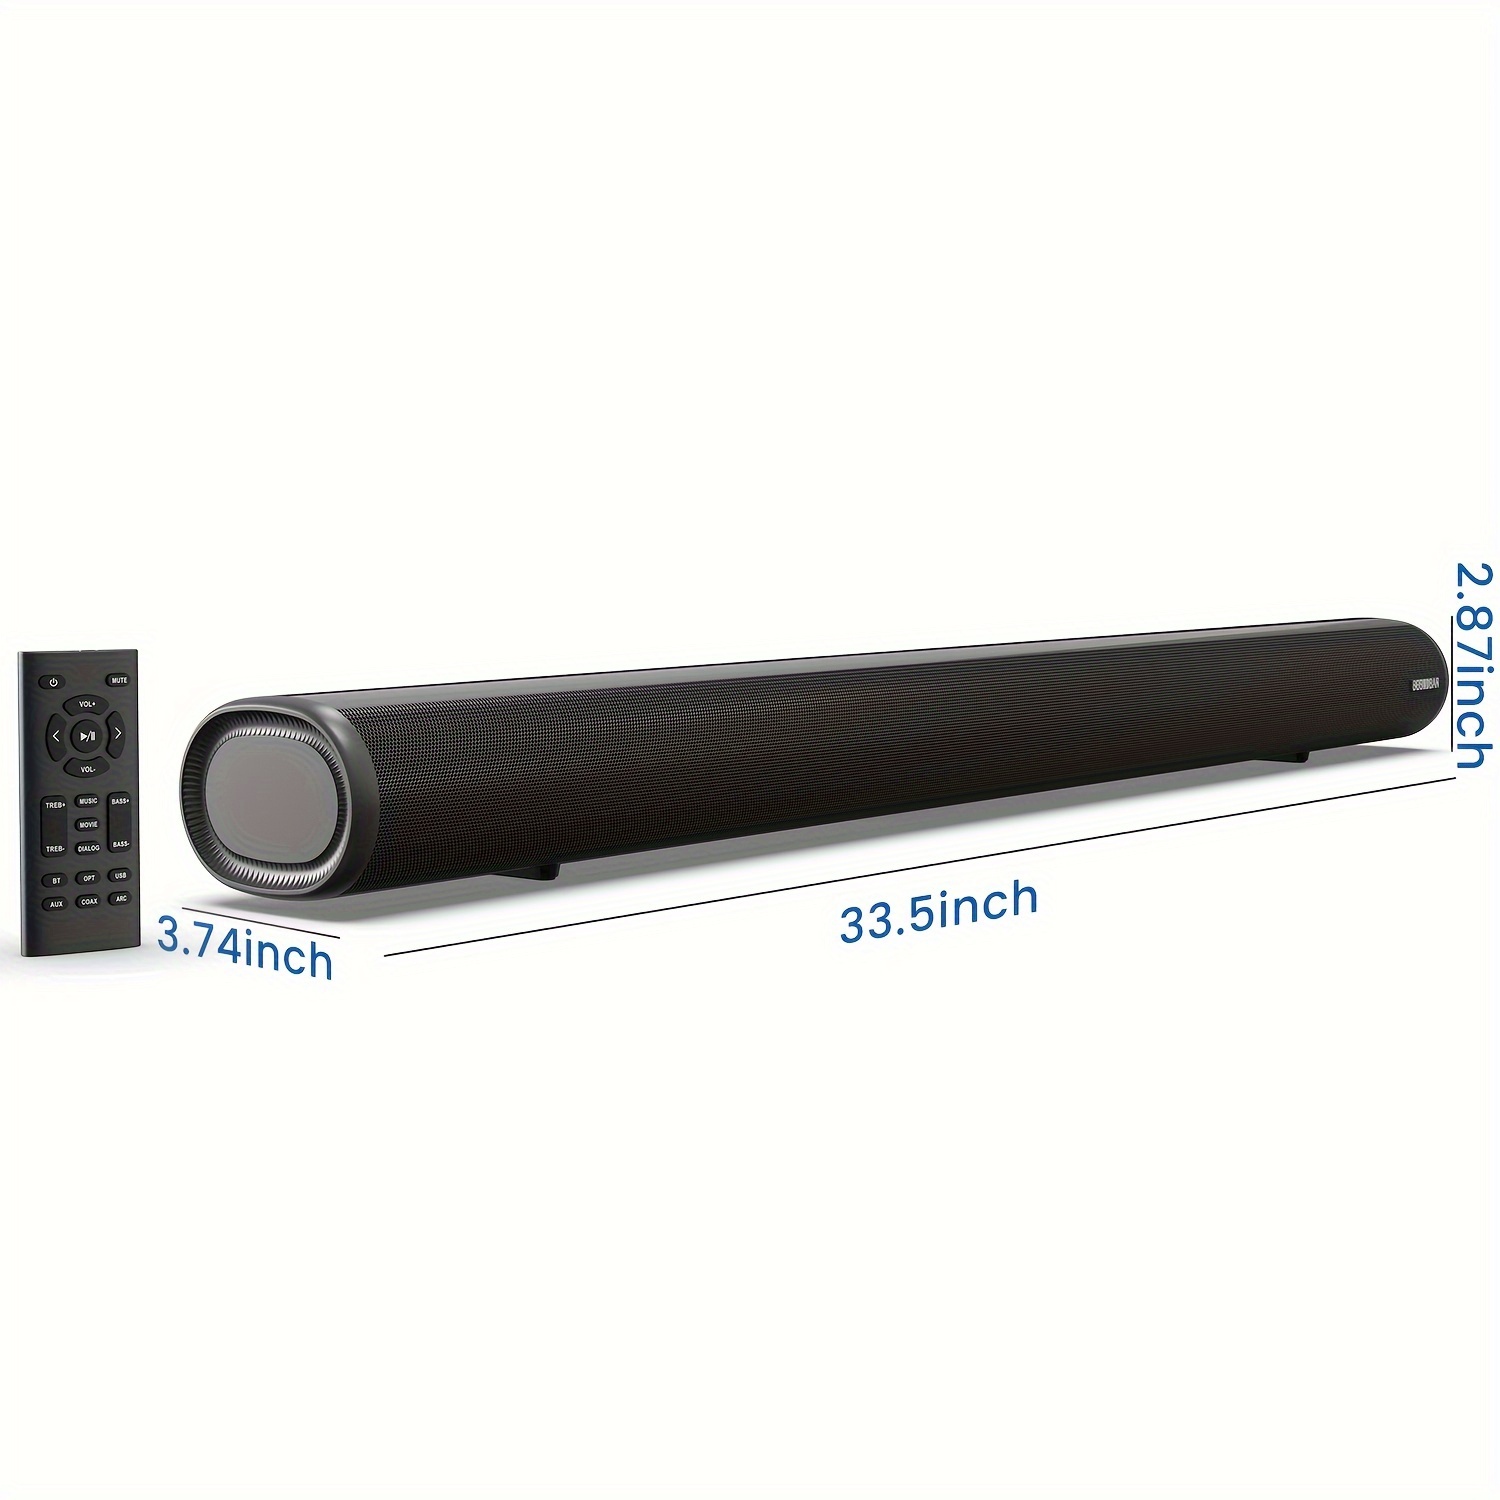 

Sound Bars For Tv, 80 Watts 33.5 Inch Sound Bars For Tv With Bt 5.0, 3 Eqs, Bass Adjustable, Arc/optical/coaxial/aux/usb Connection For Phone, Tv, Pc, Projector.